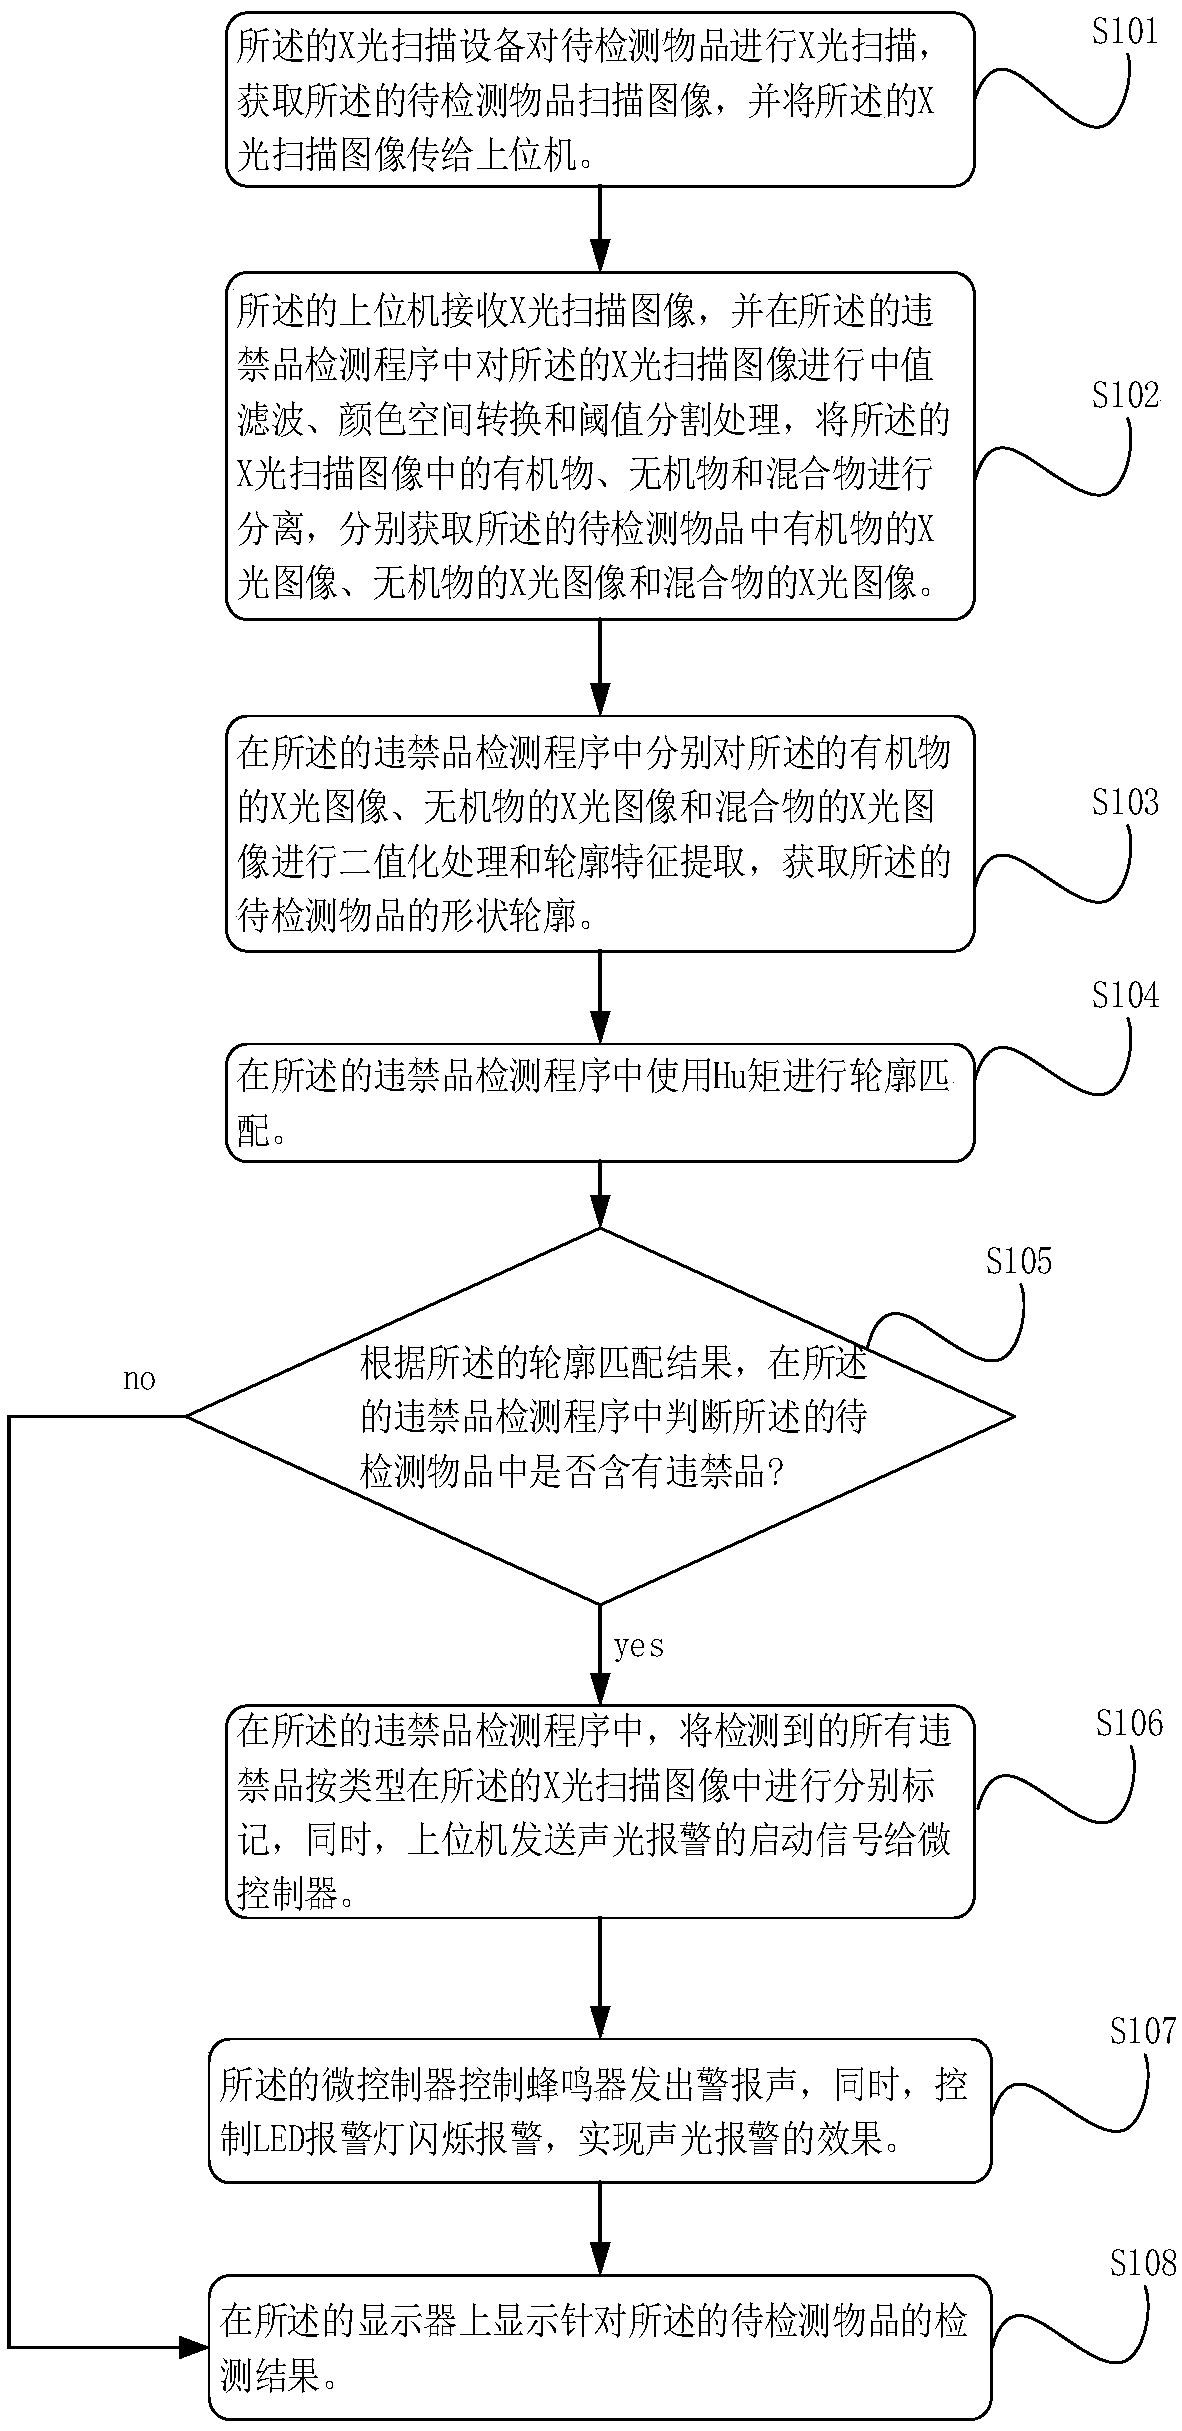 Forbidden object detection system and method based on digital image processing